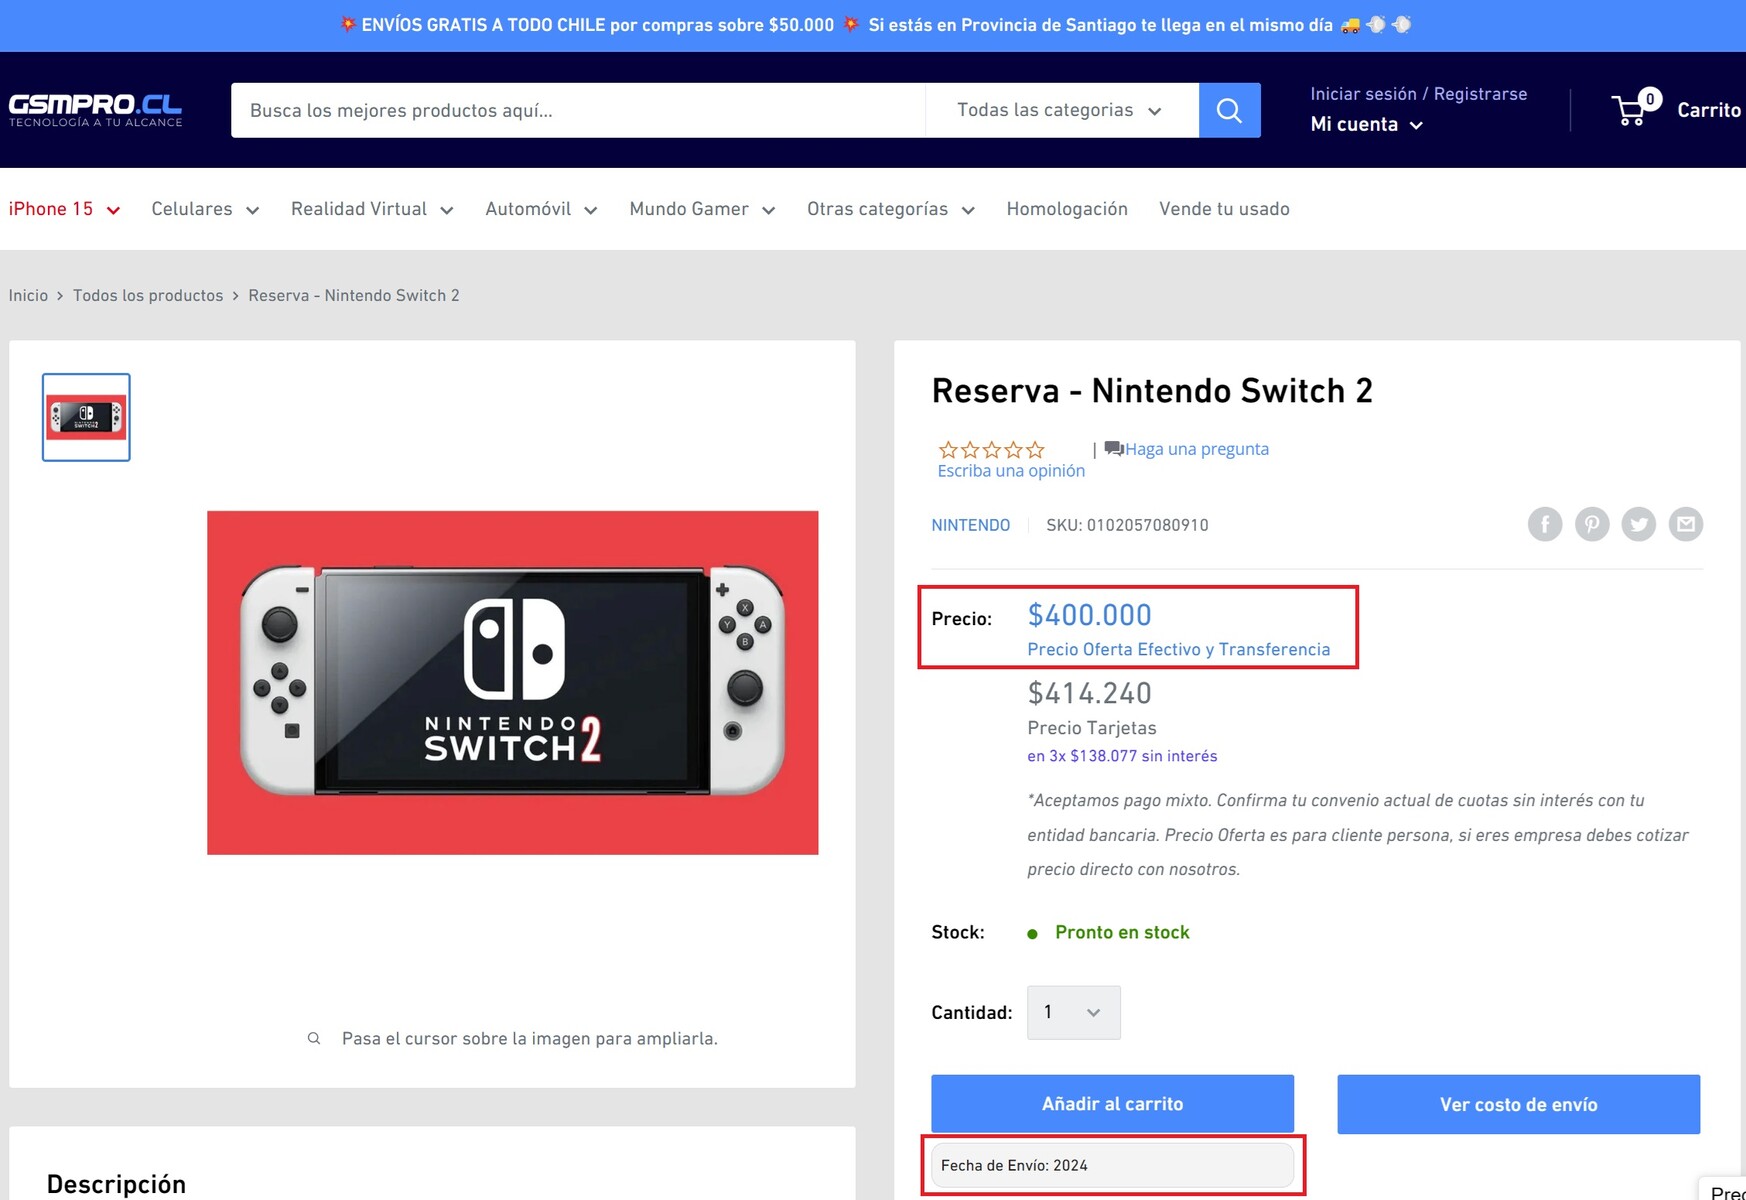 Nintendo Switch 2 pre-order page with price and rumor-based product  description posted by opportunistic Chilean retailer -   News